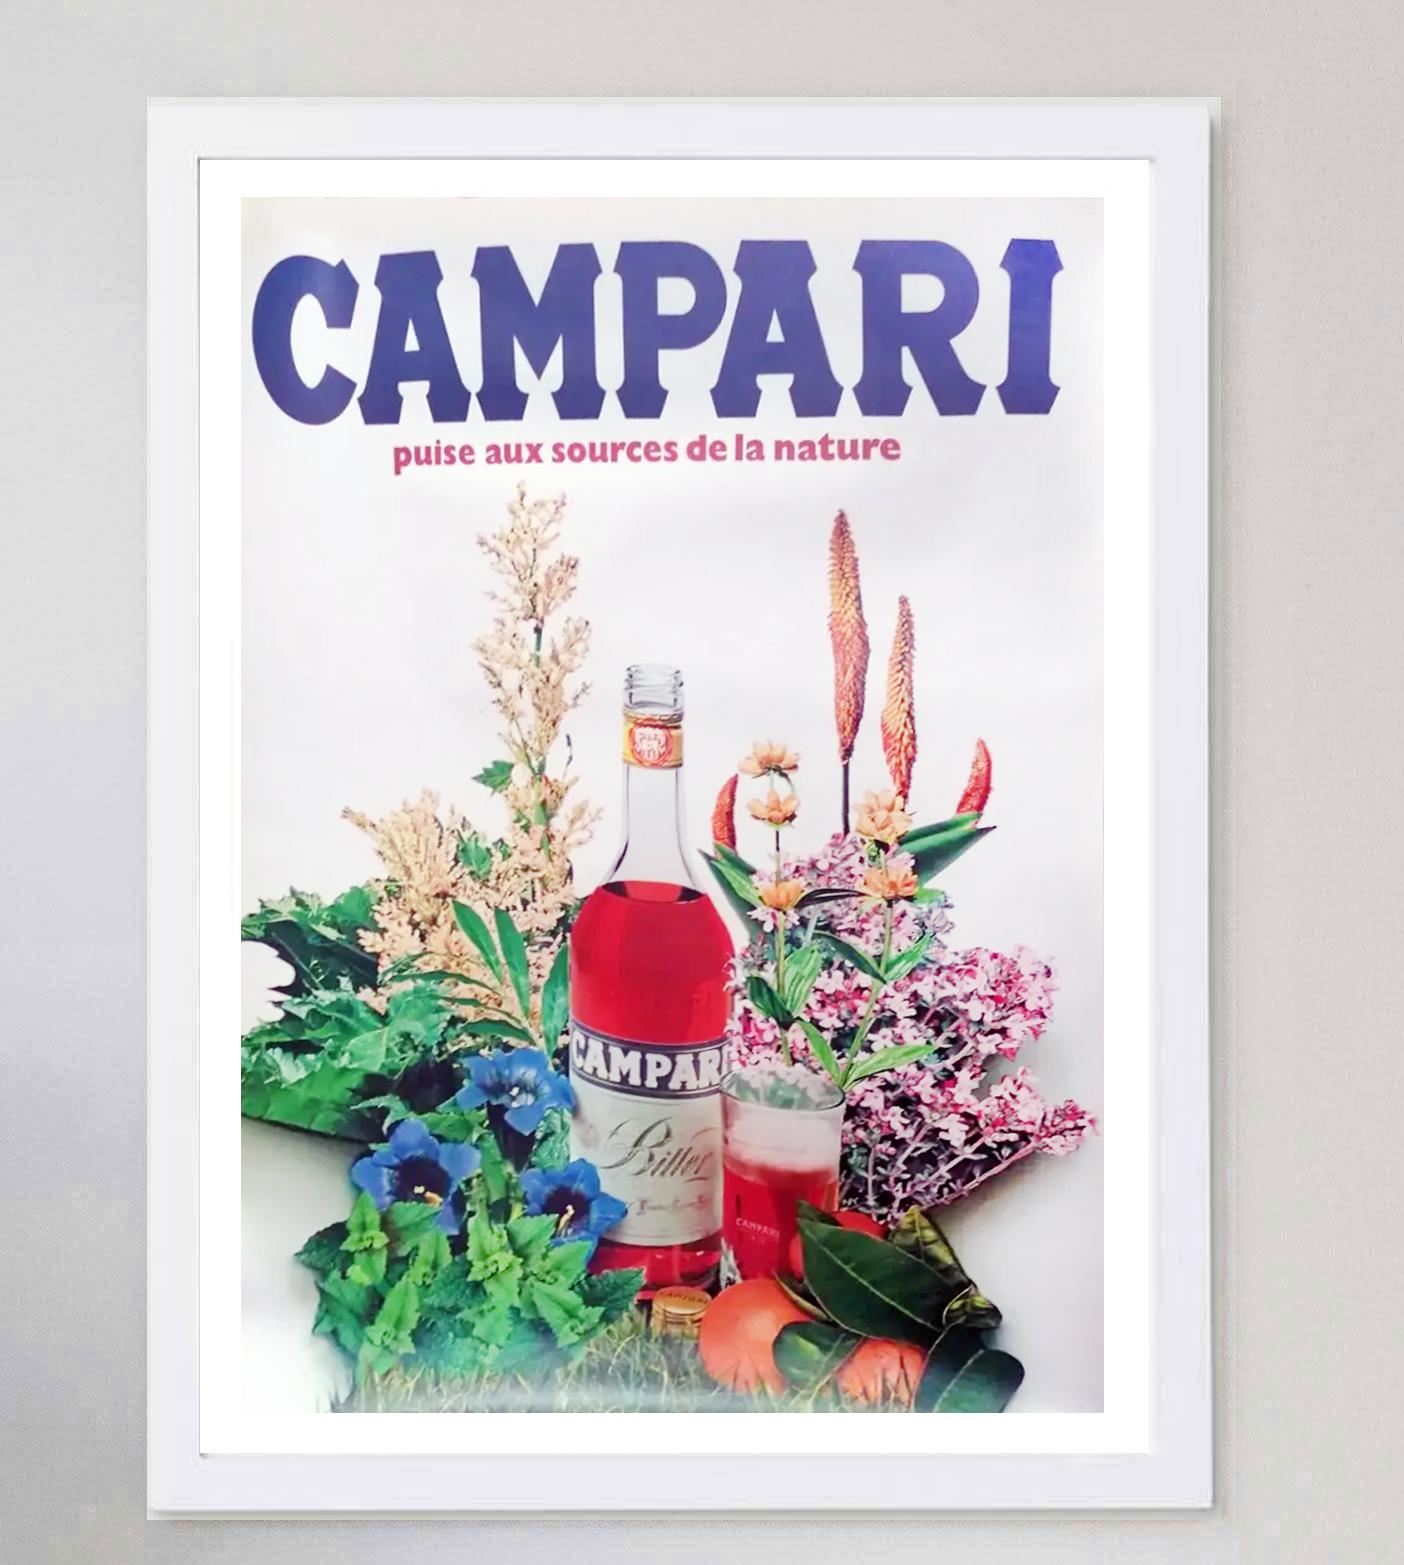 1969 Campari - Sources of Nature Original Vintage Poster In Good Condition For Sale In Winchester, GB